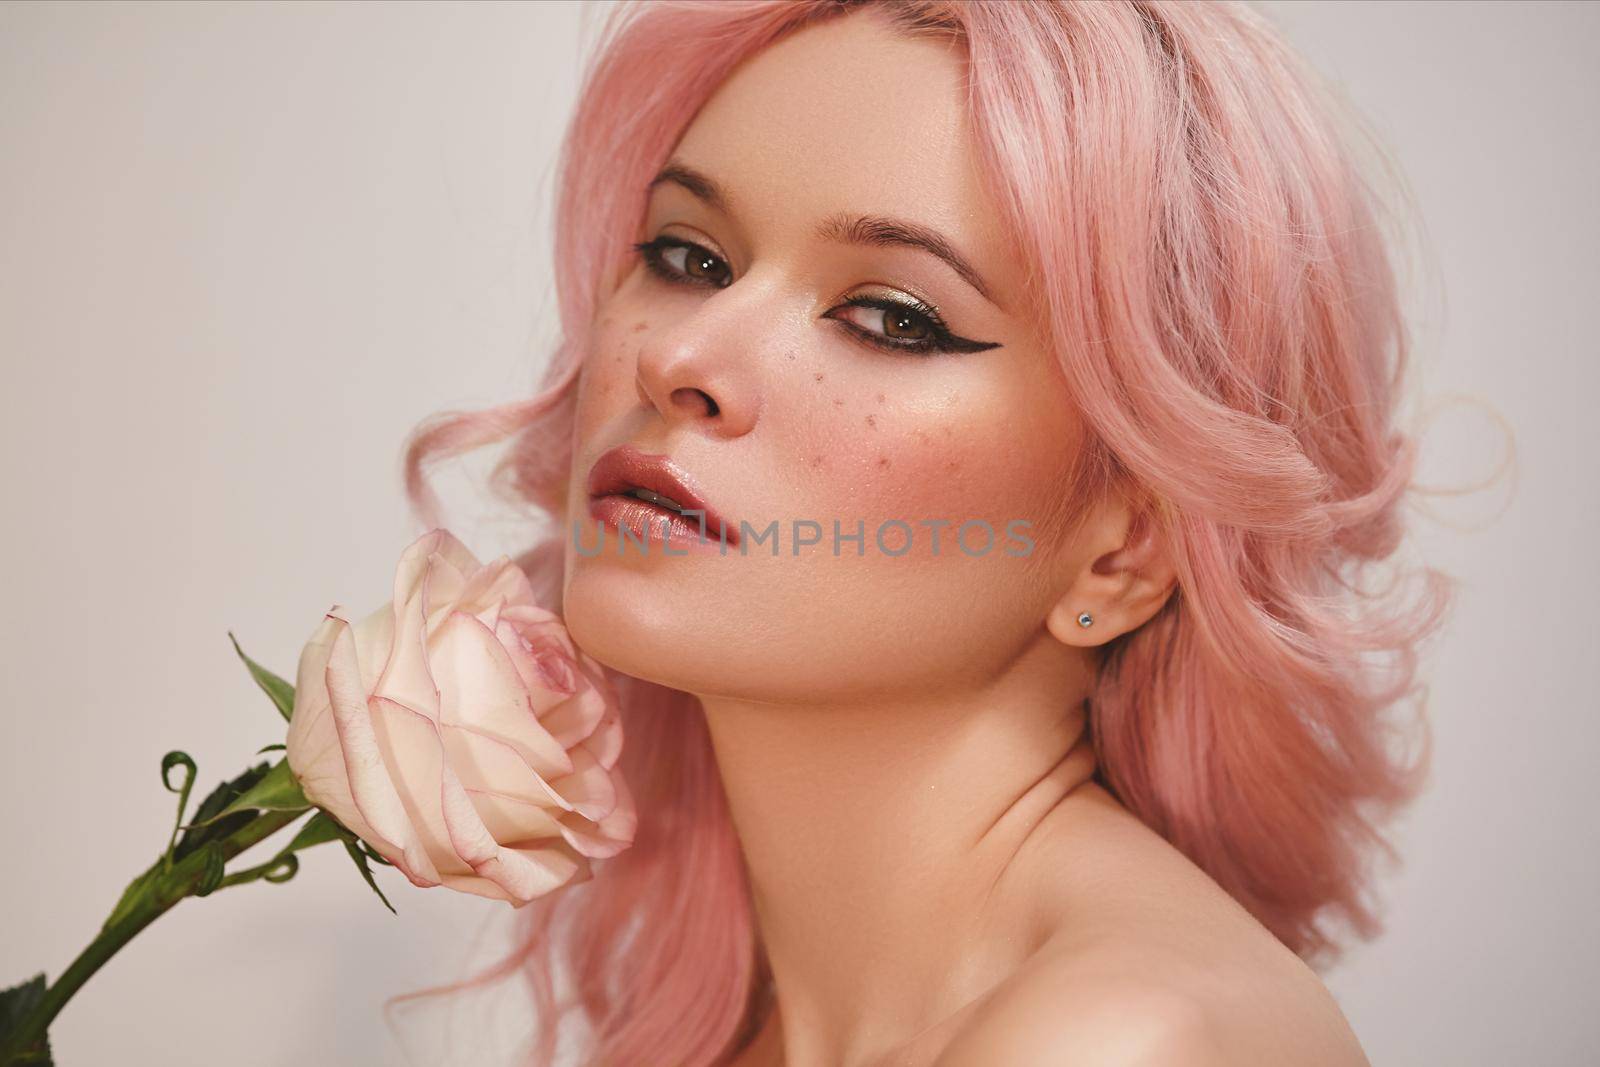 Soft-Girl Style with Trend Pink Flying Hair, Fashion Make-up. Blond Woman Face with Freckles, Blush Rouge, Rose Flowers by MarinaFrost